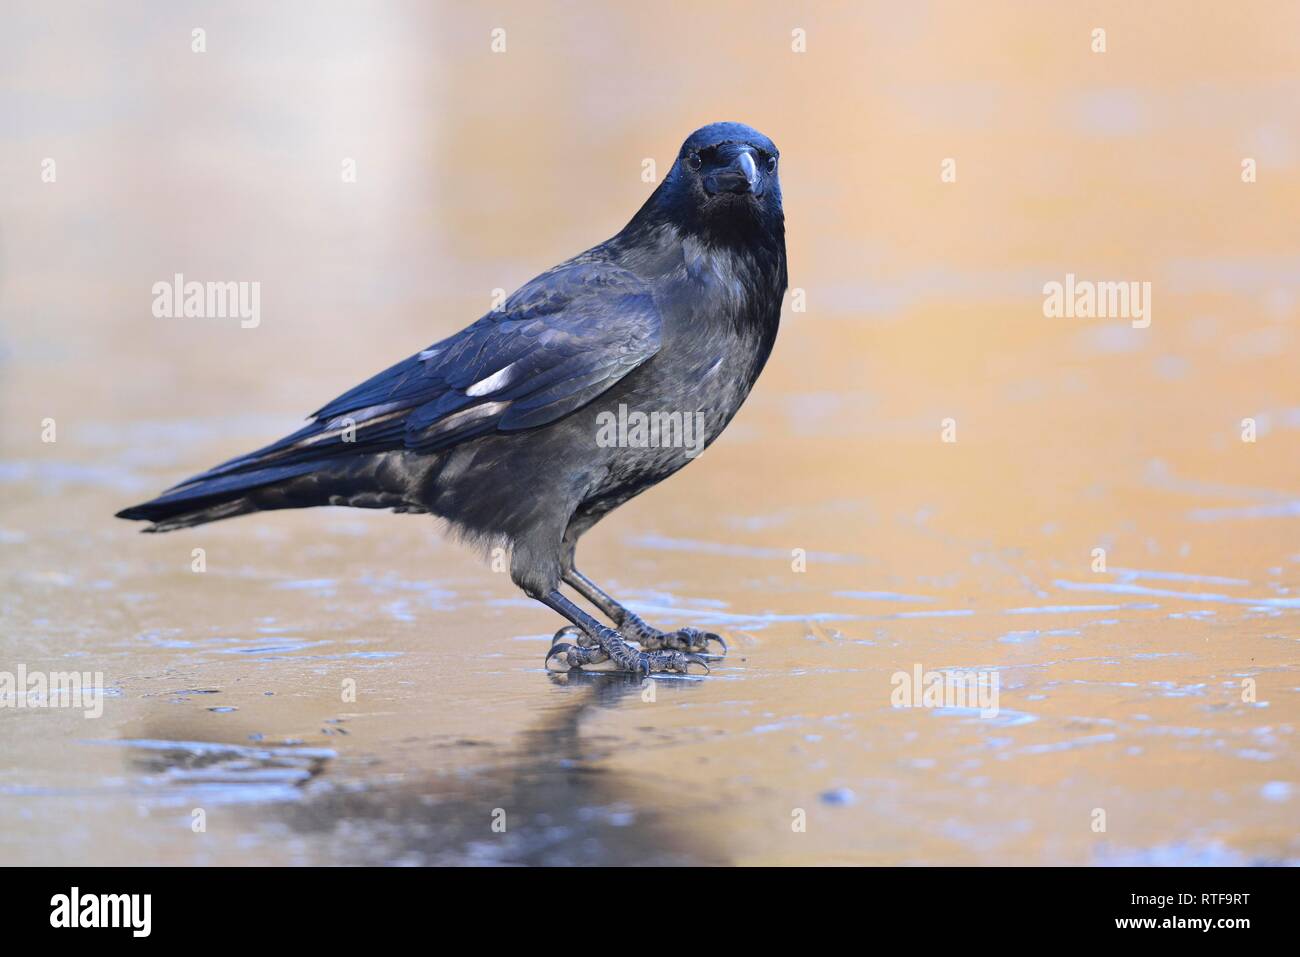 Raven crow, Carrion crow (Corvus corone), old bird standing on an ice rink, Saxony, Germany Stock Photo